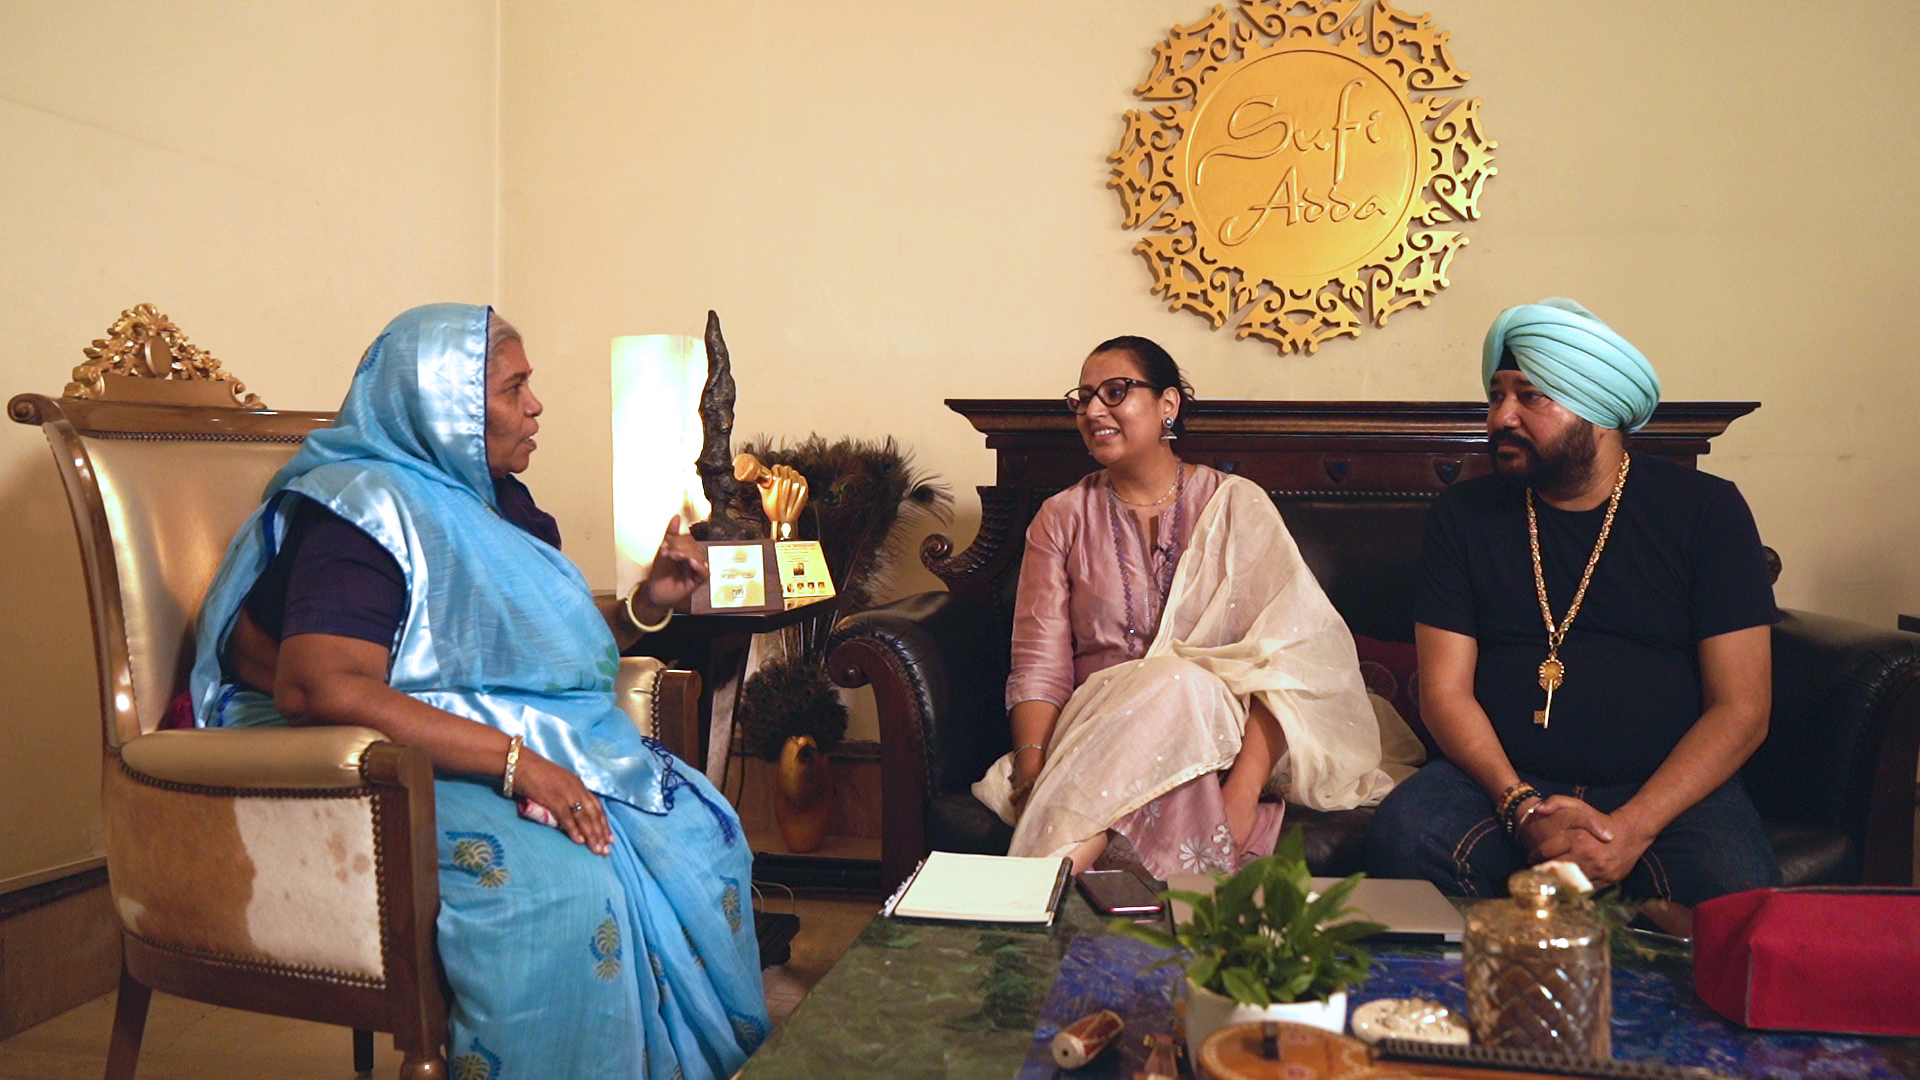 Sugan Devi (Left) with Taran and Daler Mehndi (Middle and Right)